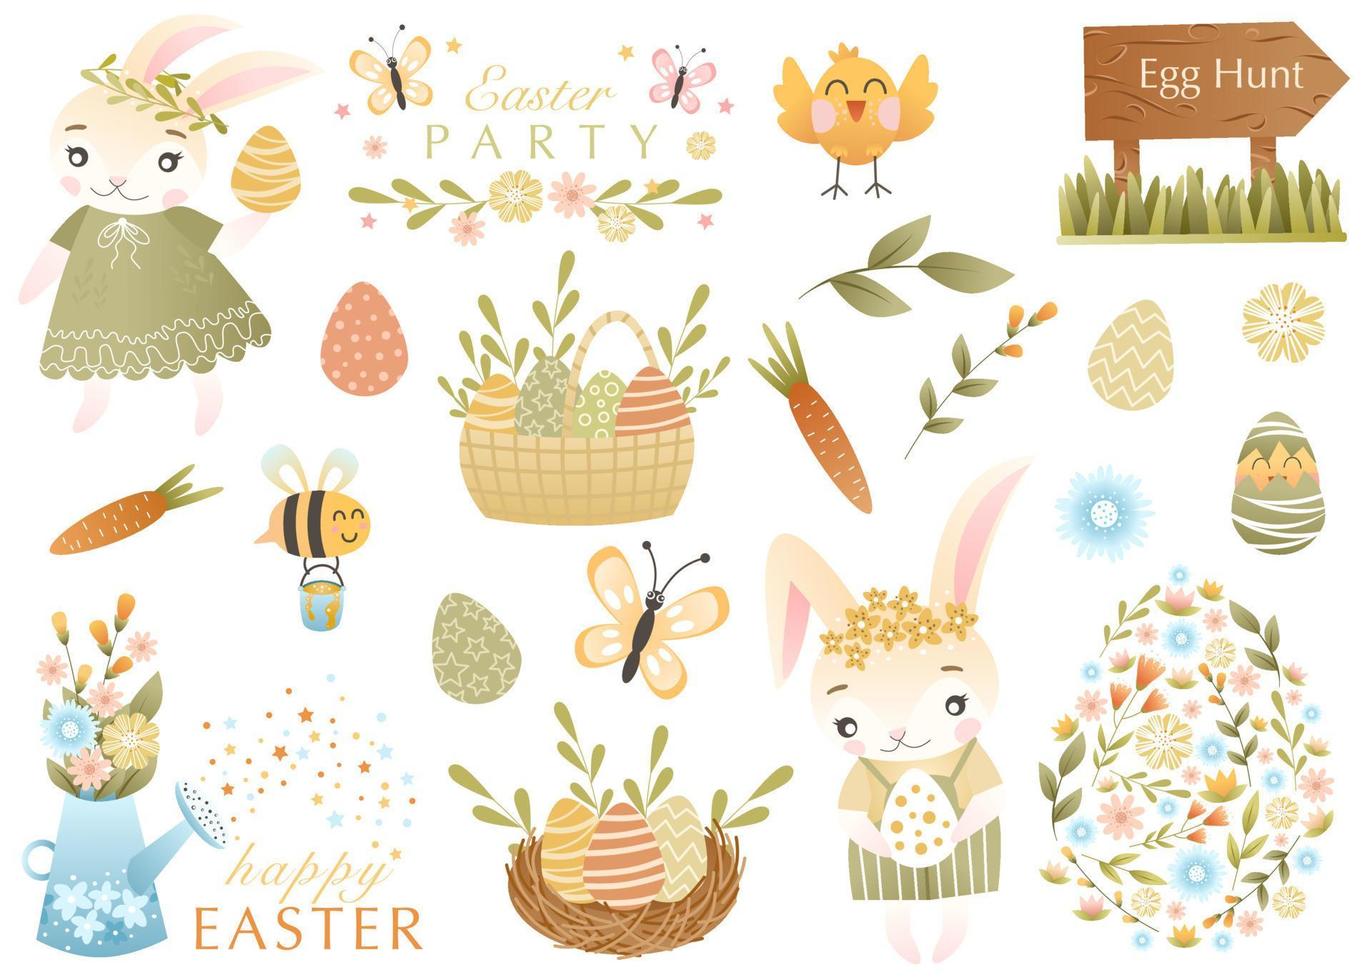 Spring and easter collection of cute bunnies, flowers, quotes, eggs and decorative elements. Perfect for poster, card, scrapbooking , tag, invitation, sticker kit. Hand drawn vector illustration.